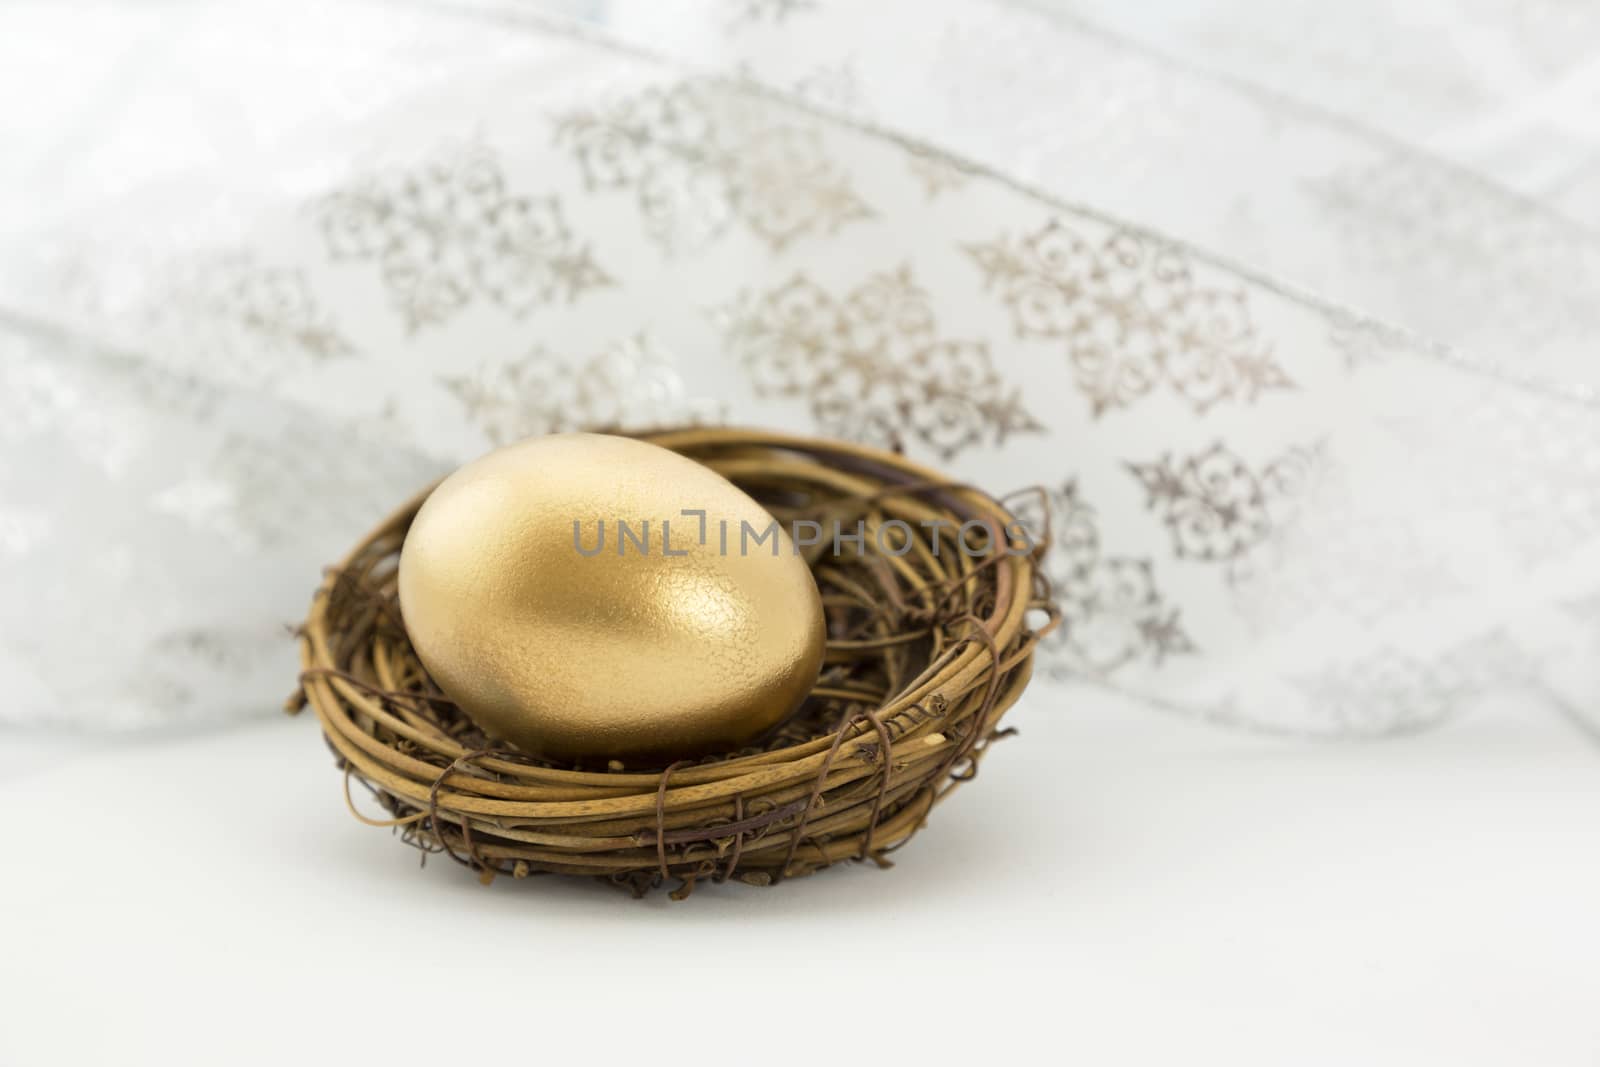 Celebration with gold nest egg in front of white ribbons by fmcginn